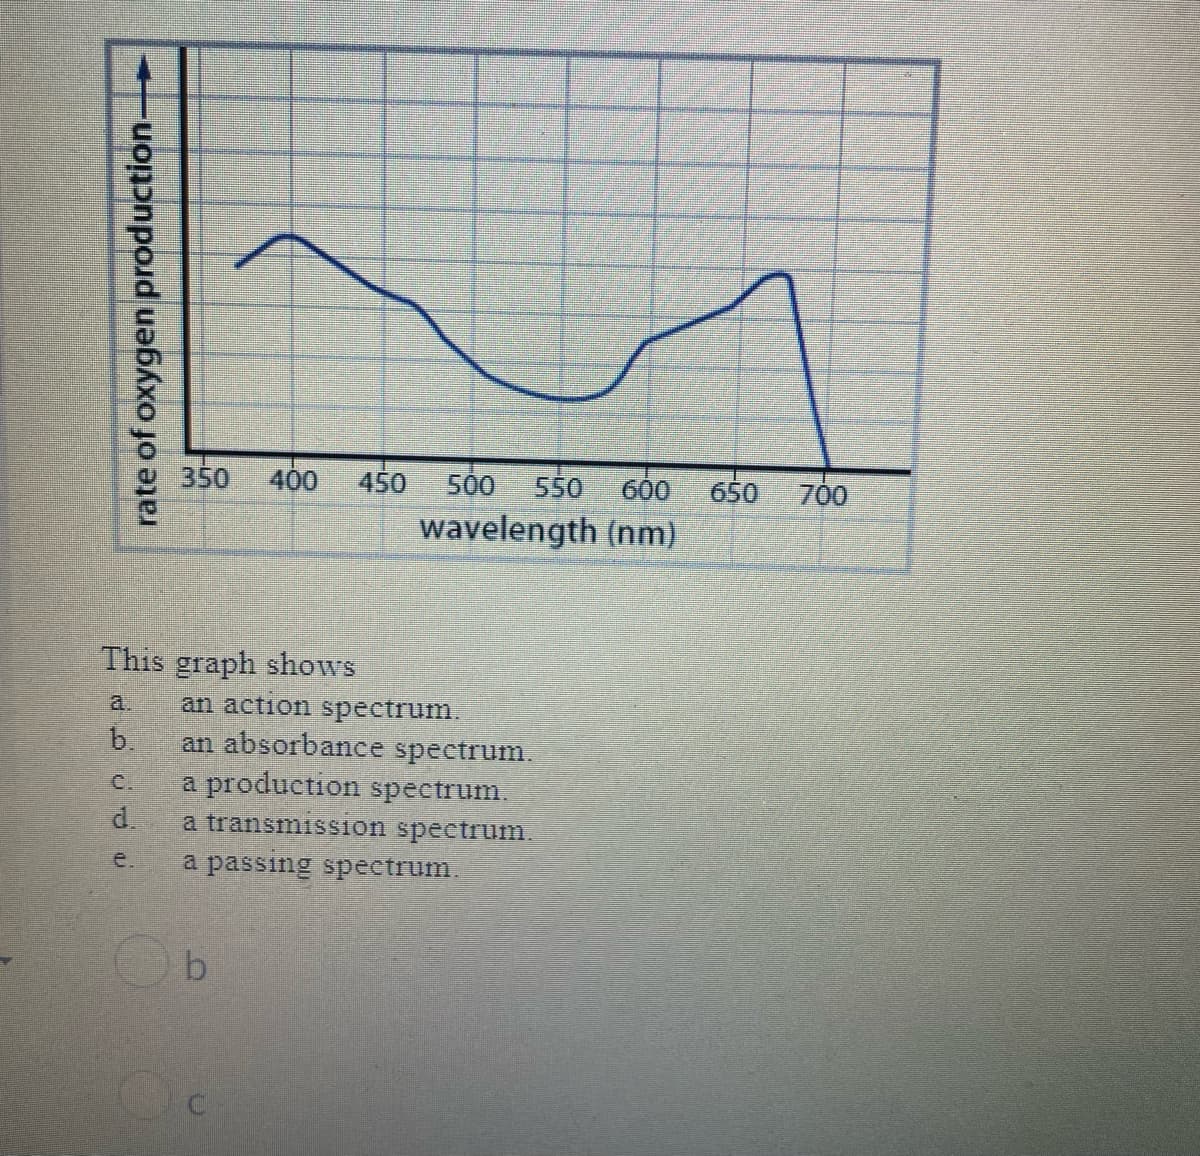 rate of oxygen production—
350 400 450 500 550 600
wavelength (nm)
This graph shows
b.
c.
ro
an action spectrum.
an absorbance spectrum.
a production spectrum.
a transmission spectrum.
a passing spectrum.
b
650 700